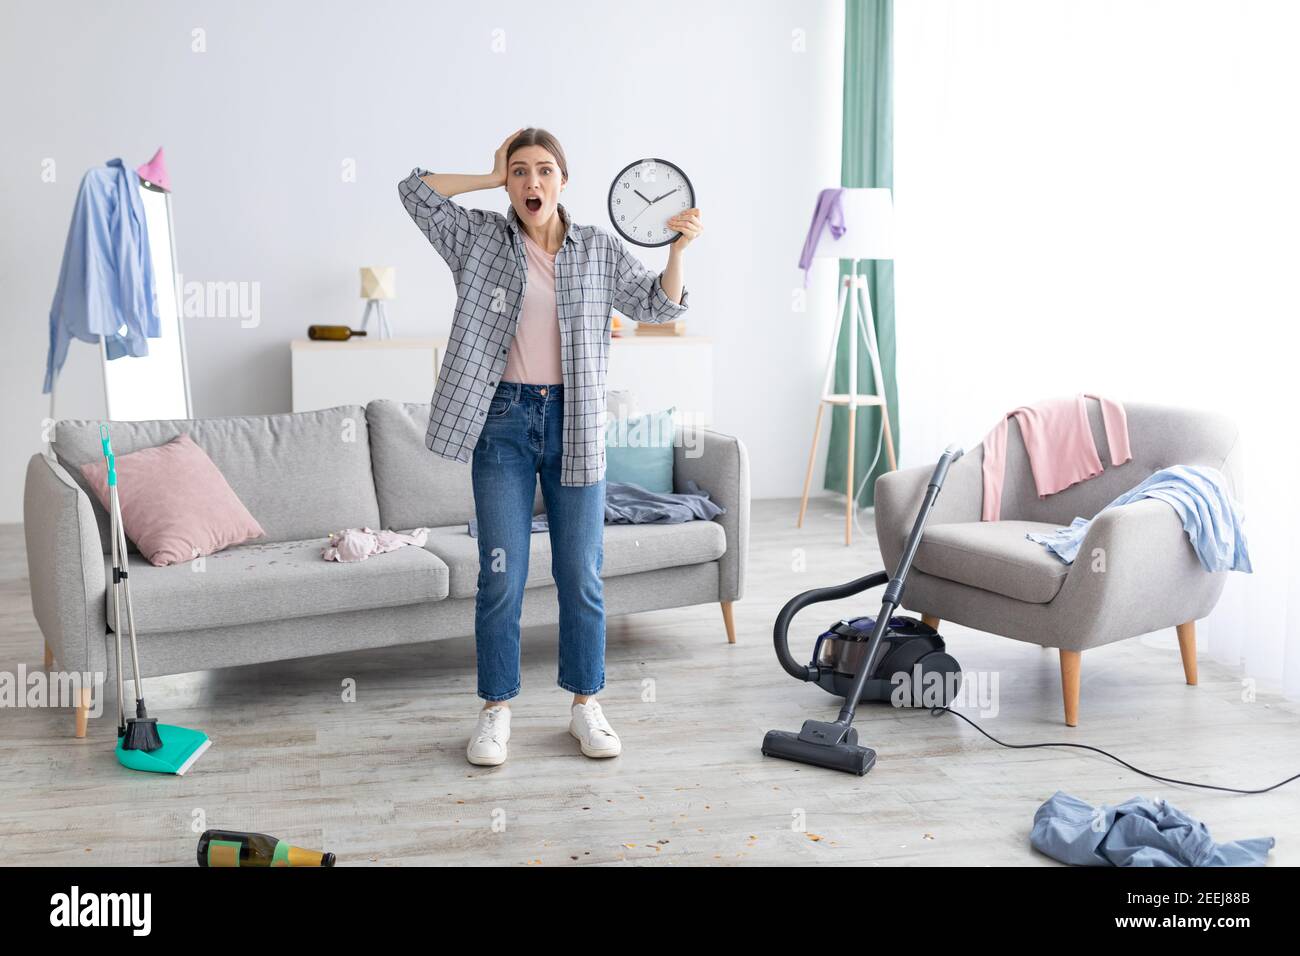 Shocked young lady with clock standing in messy room after party, too late to clean apartment before parents return Stock Photo